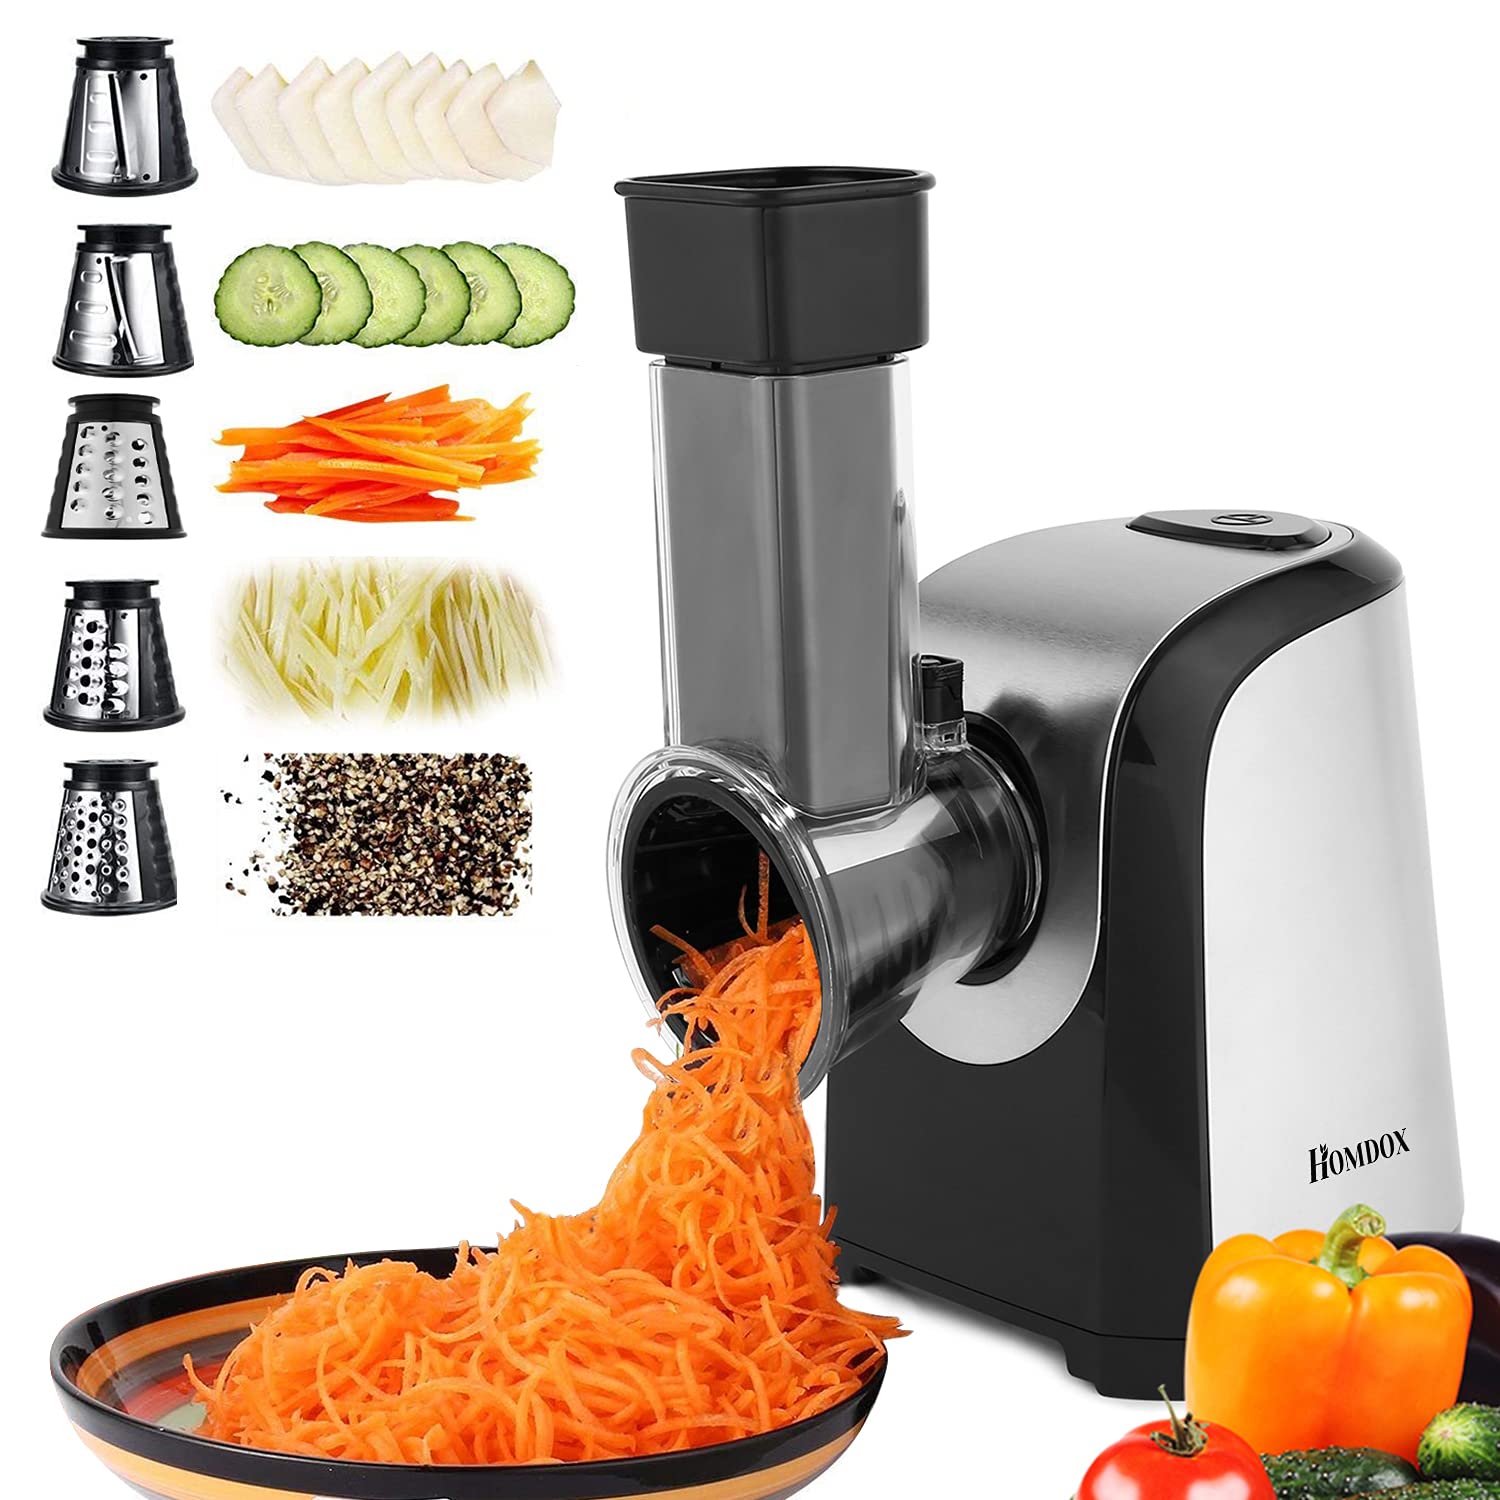 Homdox Electric cheese grater 5 in 1 Salad Shooter Electric SlicerShredder 150W Professional One-Touch control Salad Maker for cheese,